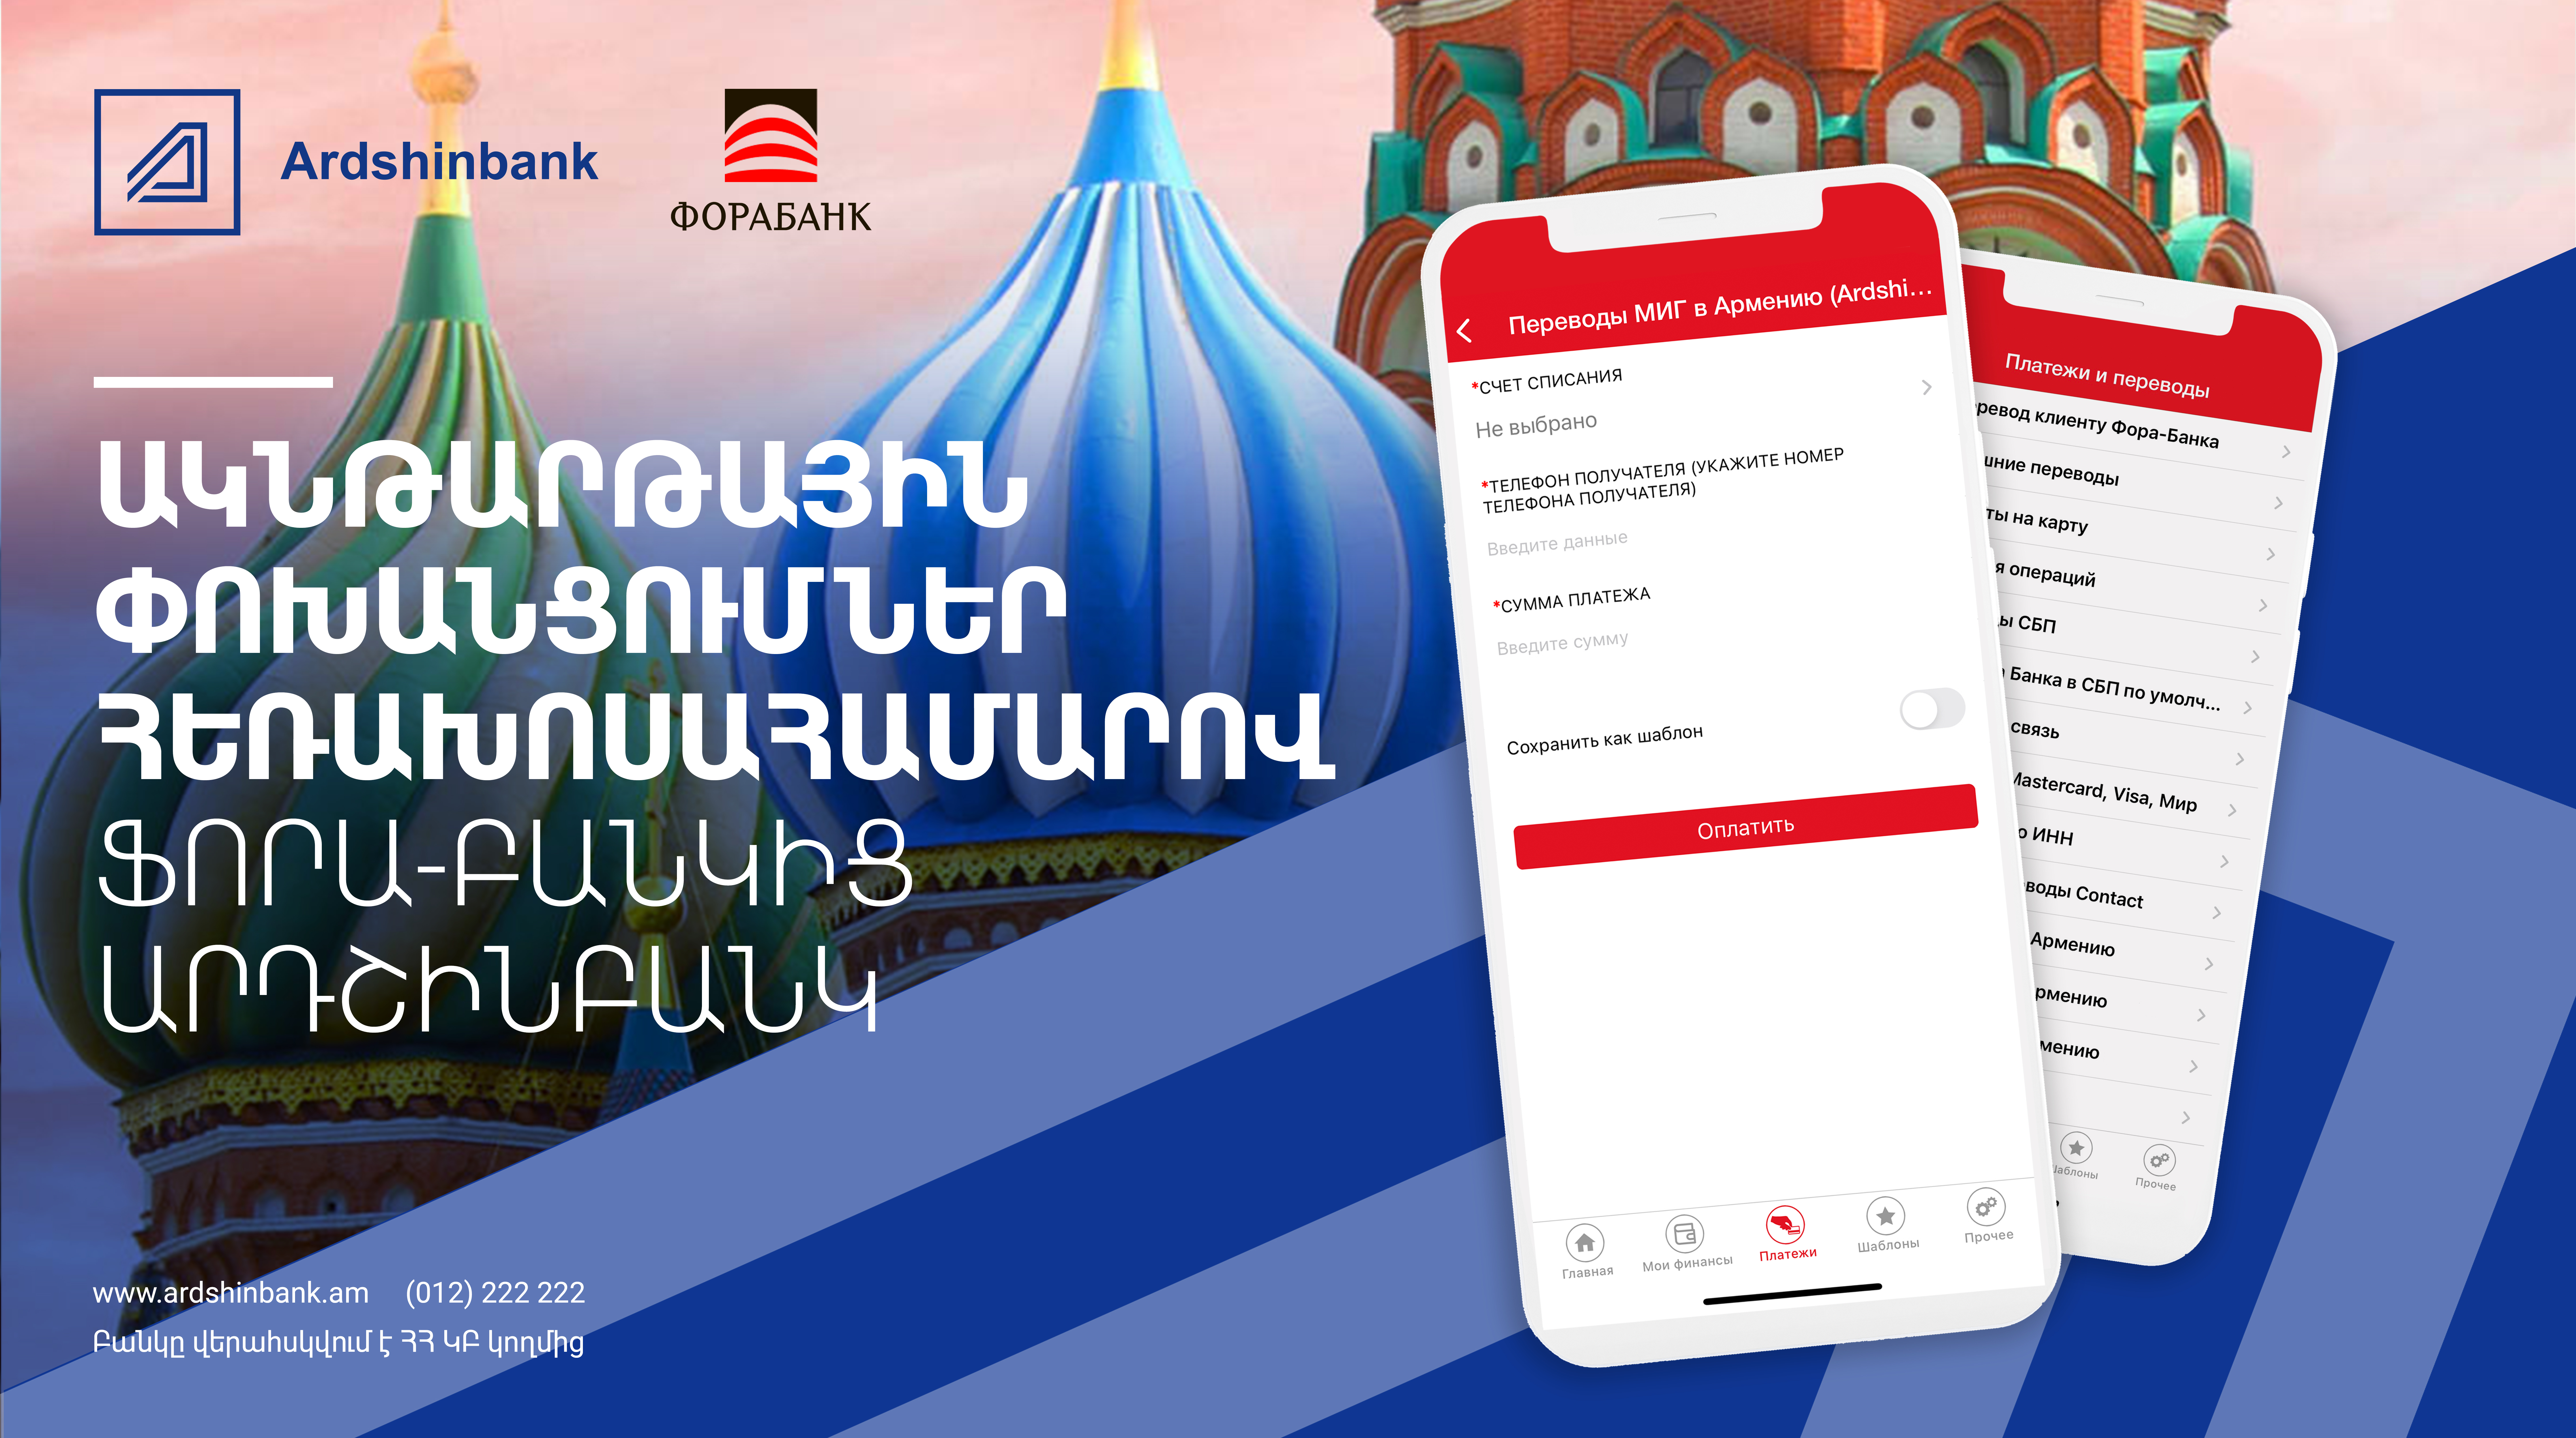 Ardshinbank and Russian Fora-Bank offer instant money transfers by phone number